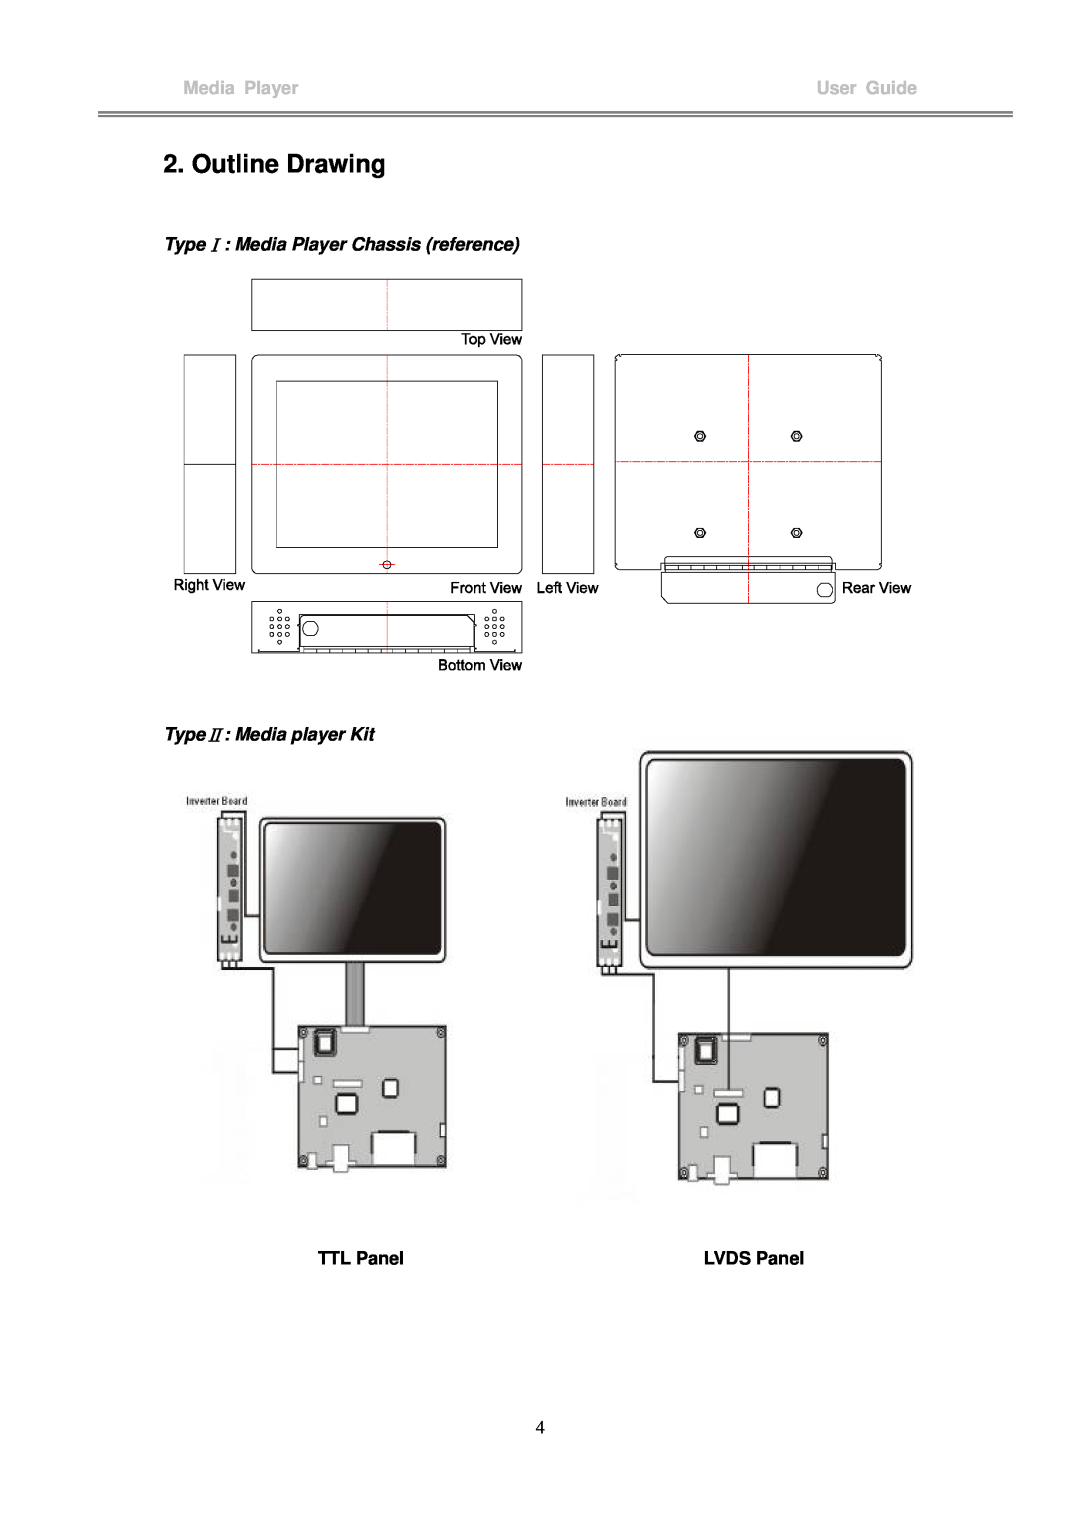 I-Tech Company MP3 Headphone Outline Drawing, User Guide, TypeⅠ Media Player Chassis reference, TypeⅡ Media player Kit 